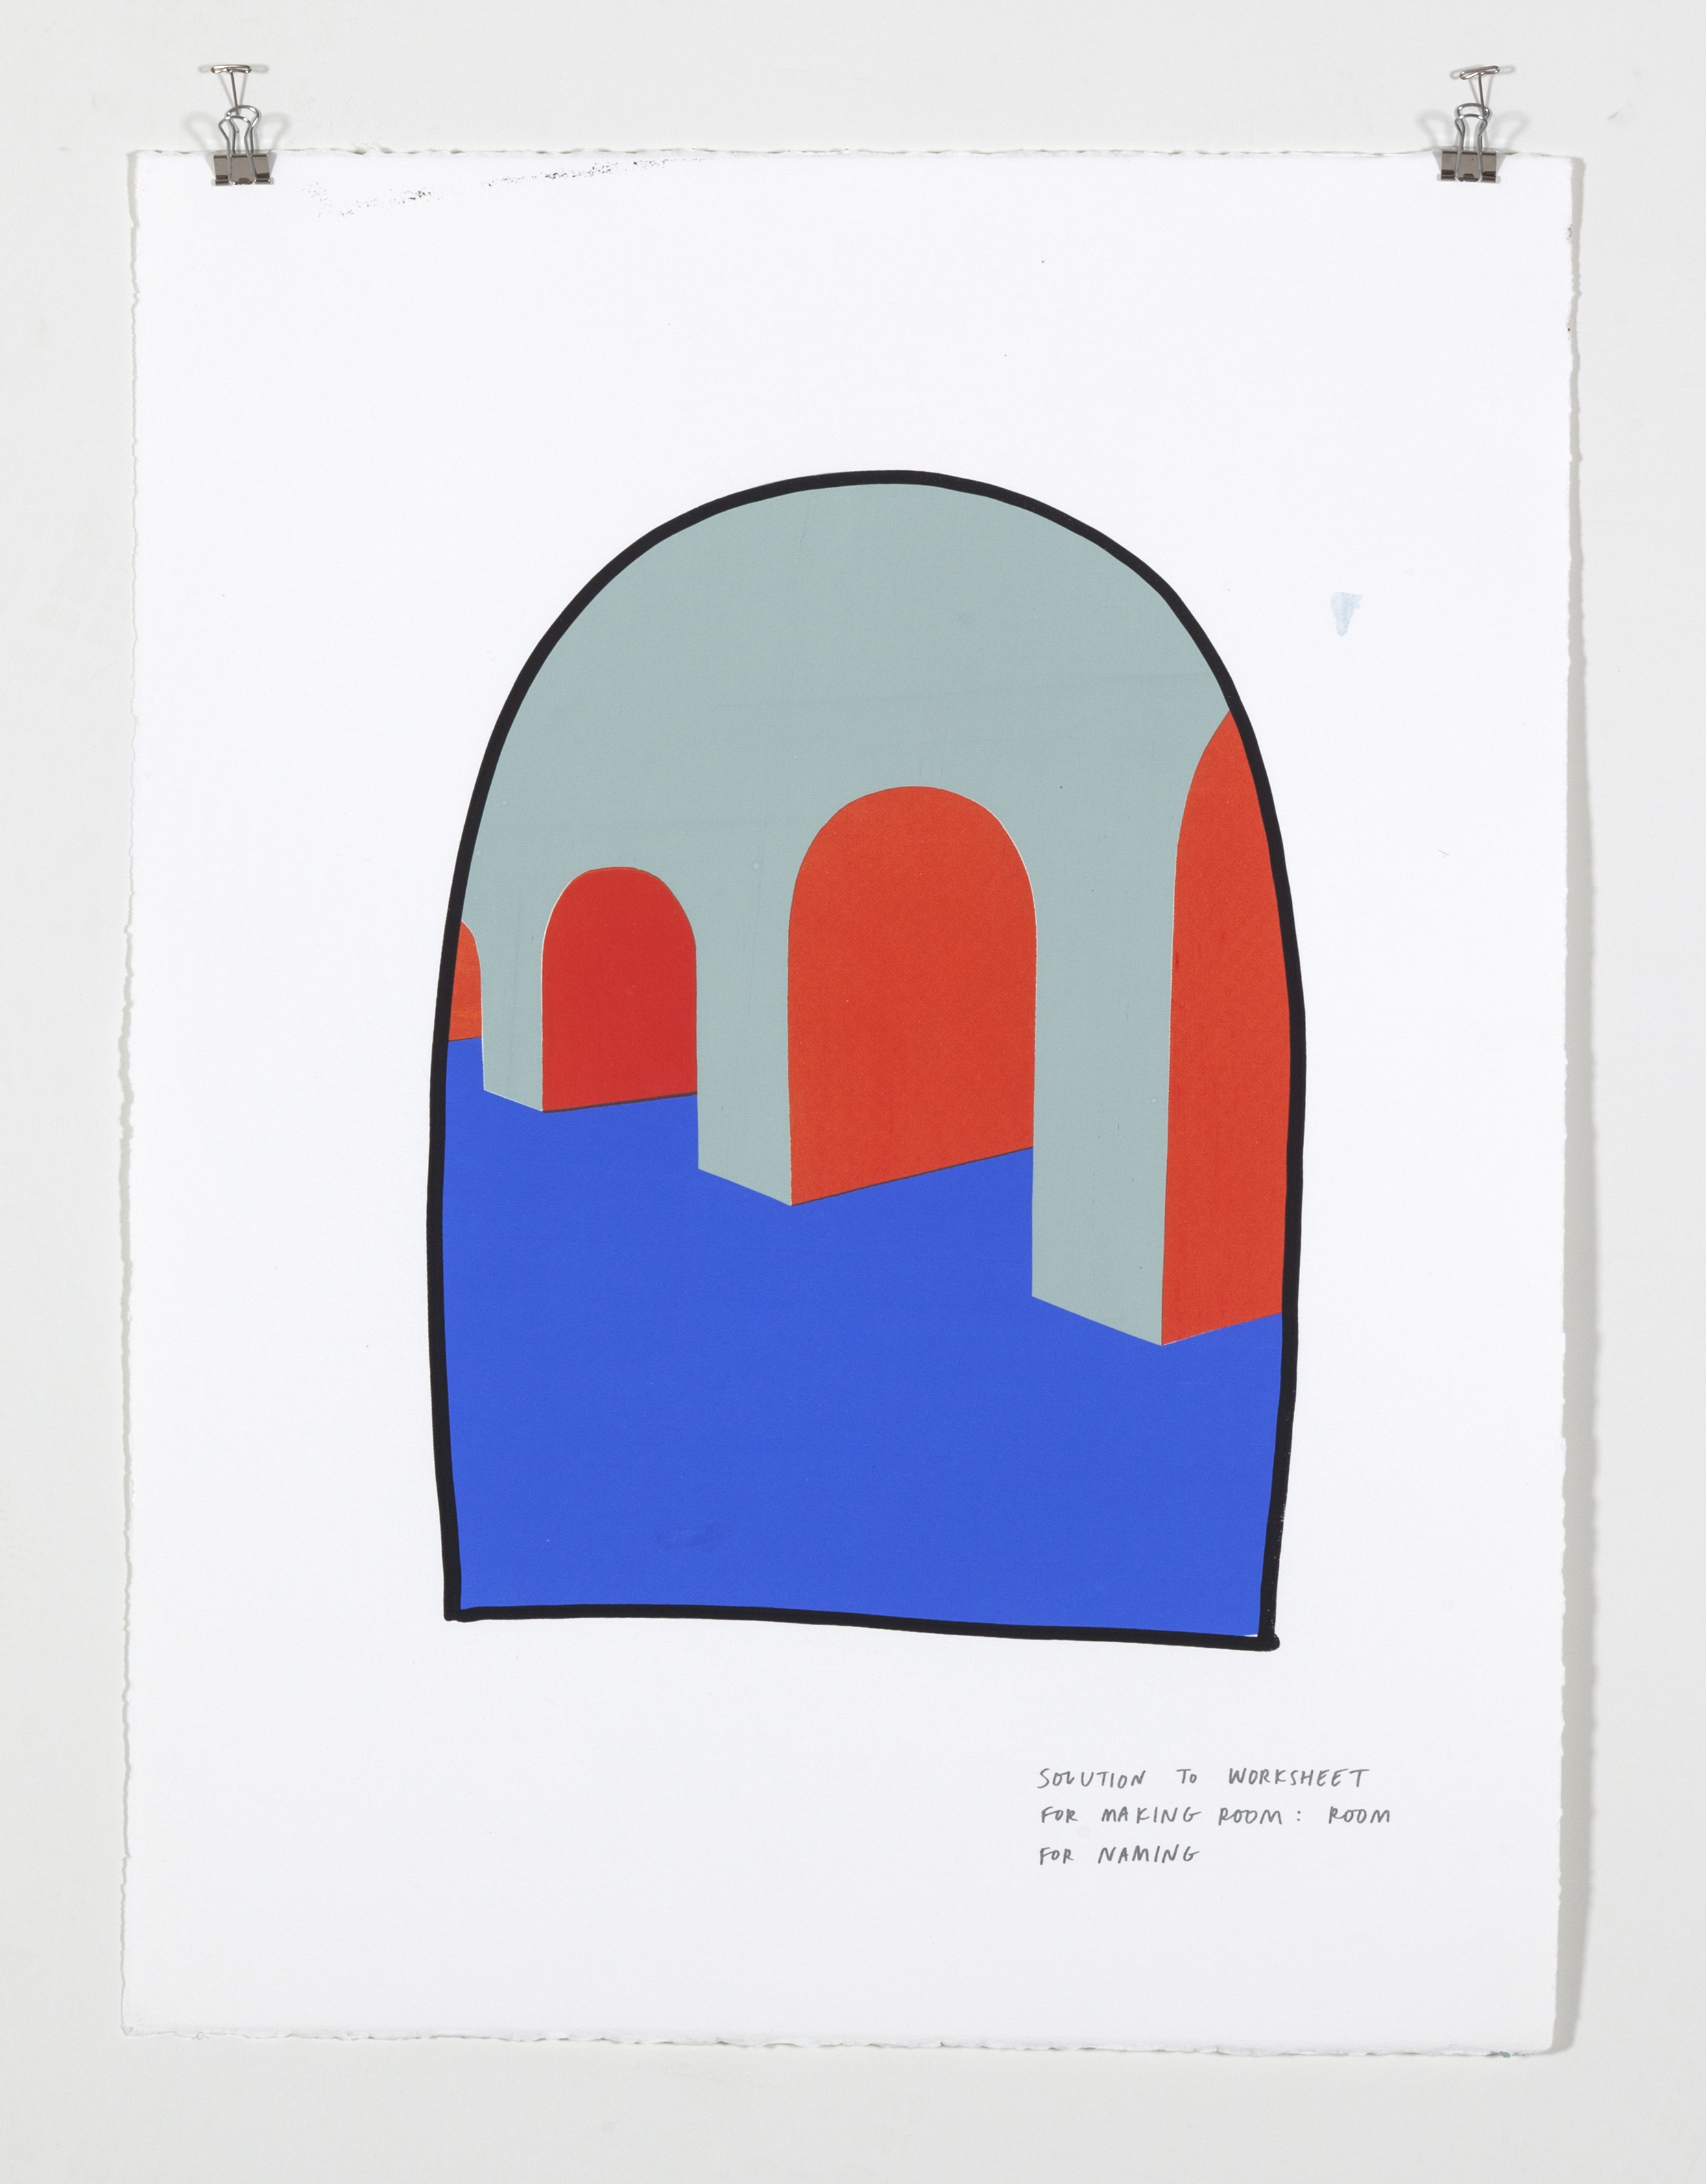    Solution to Worksheet for Making Room: Room for Naming,  2018  Five color silkscreen print on paper 19 7/8 x 25 7/8 inches 